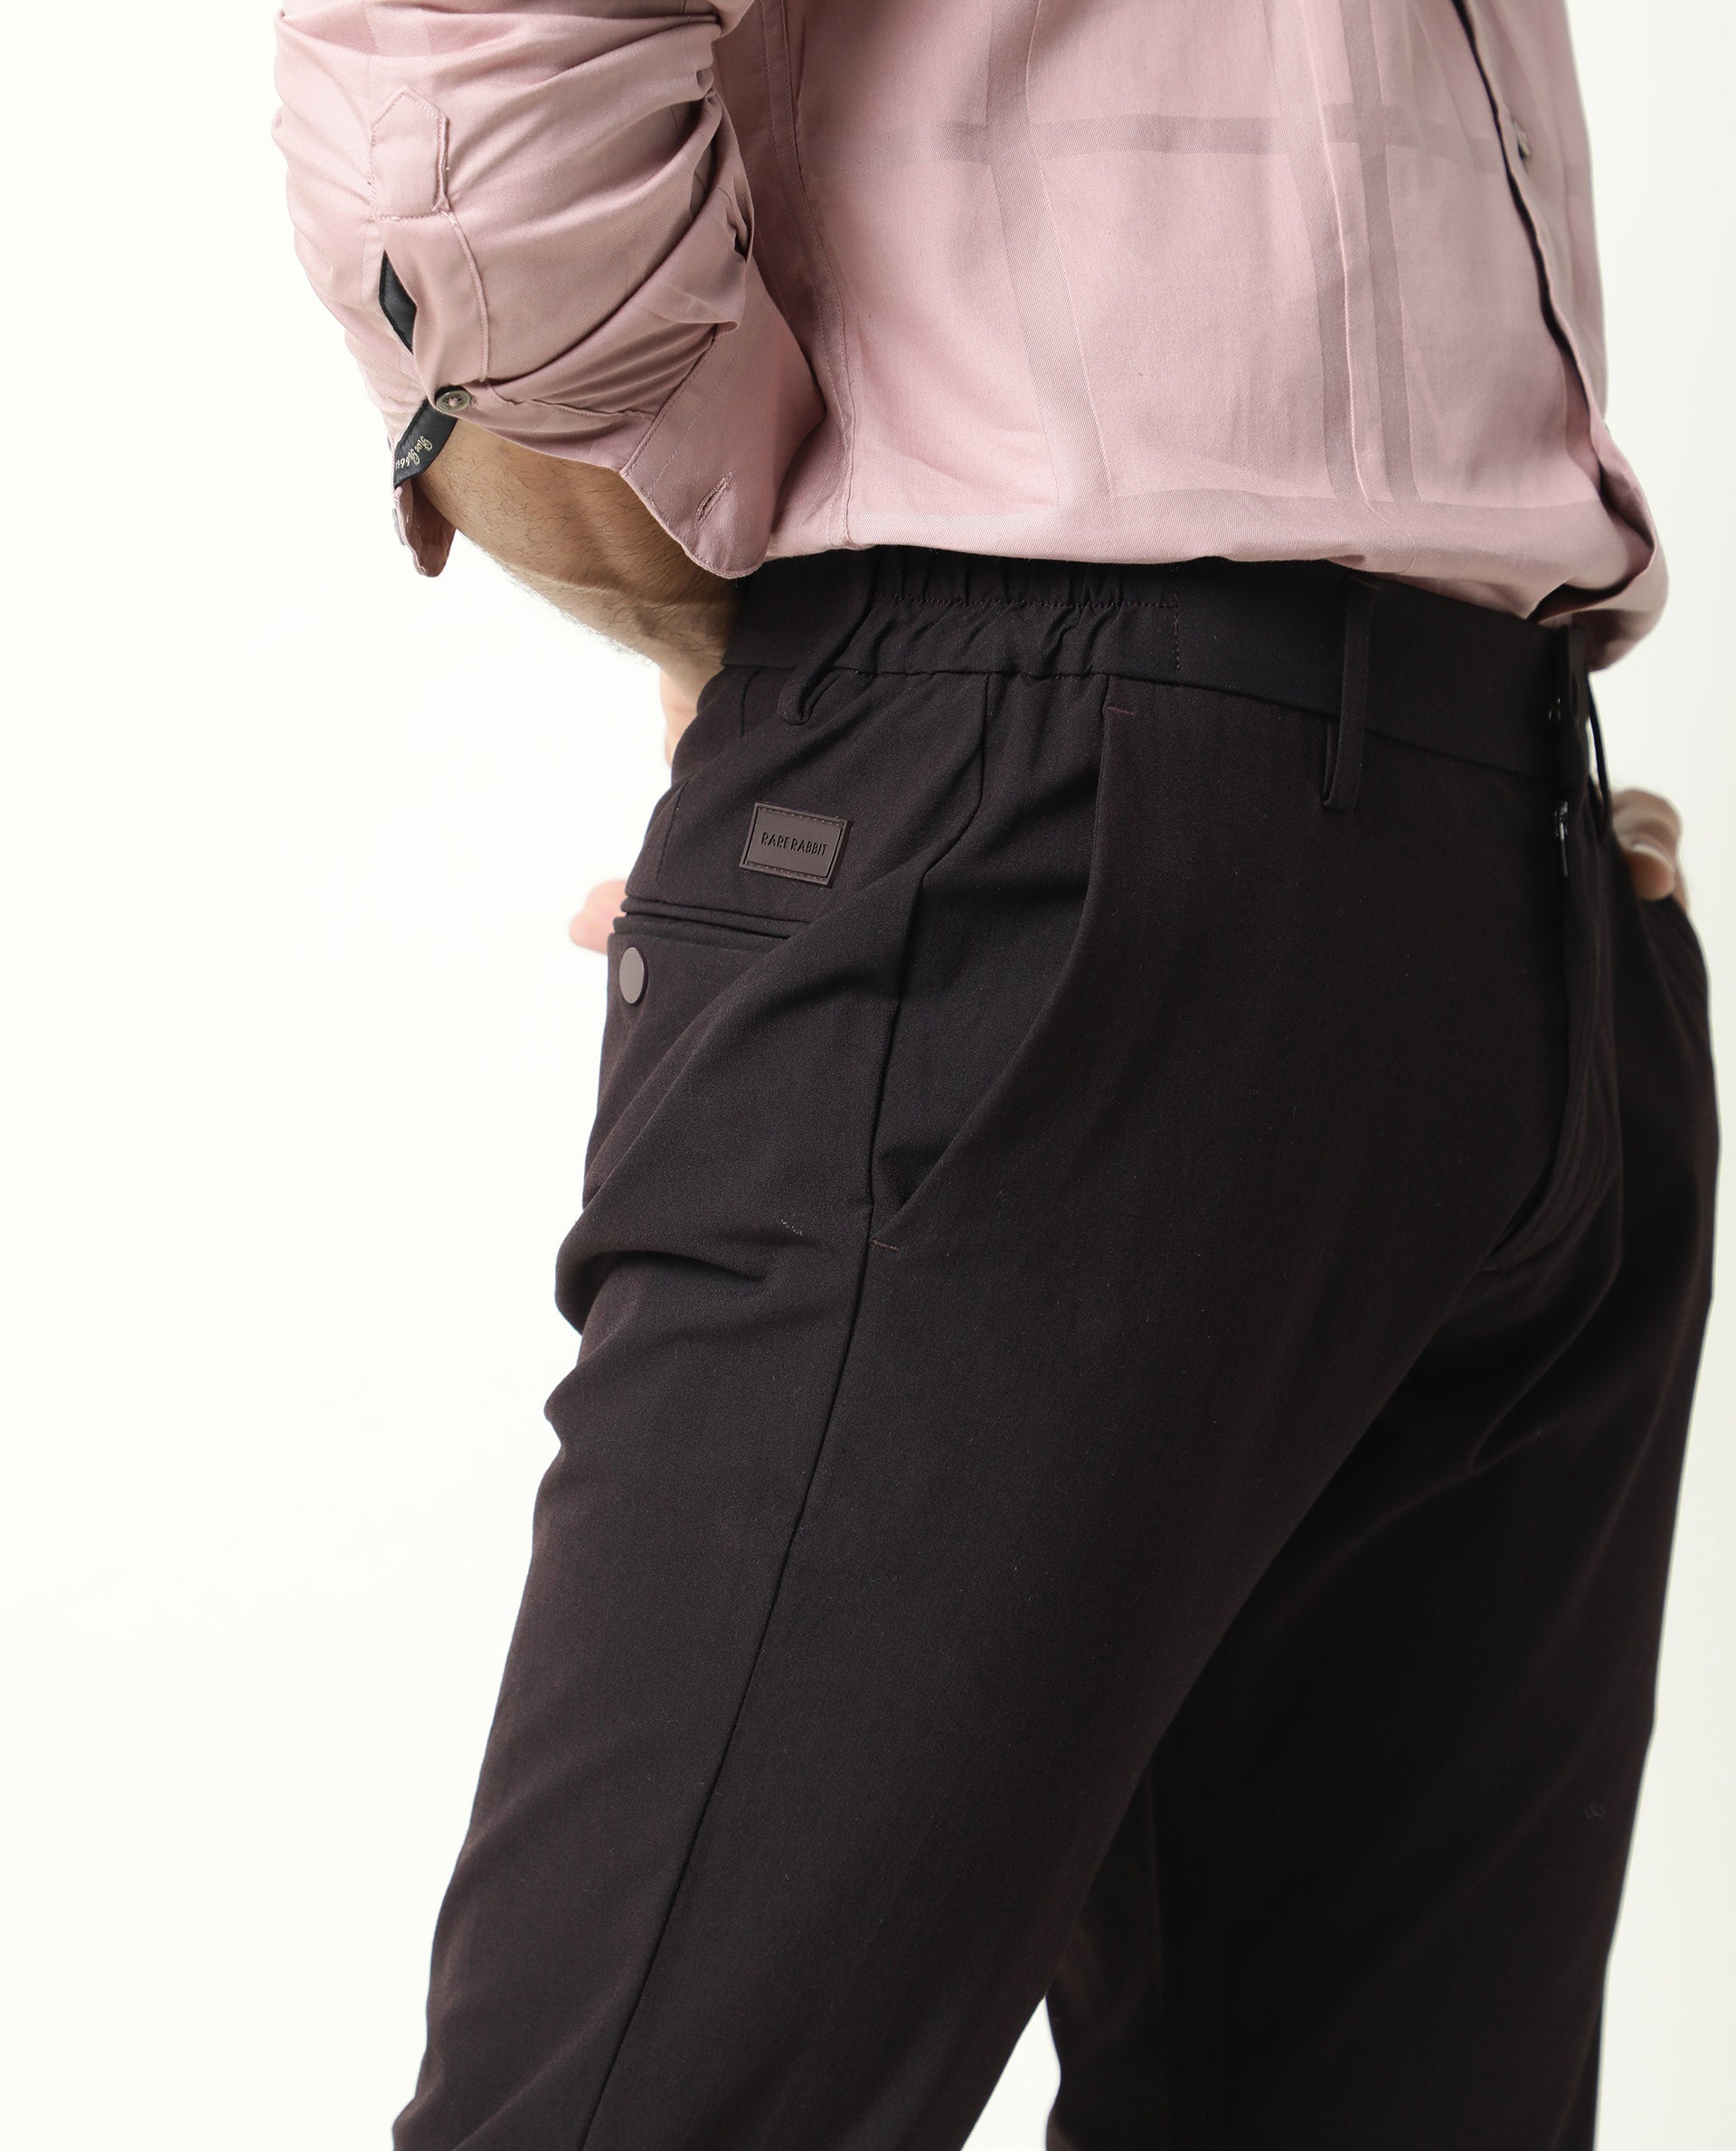 SHIVAY ENTERPRISE Mens 4Way Stretch Trousers made with Lycra for comfort  and mobilitytrousers for